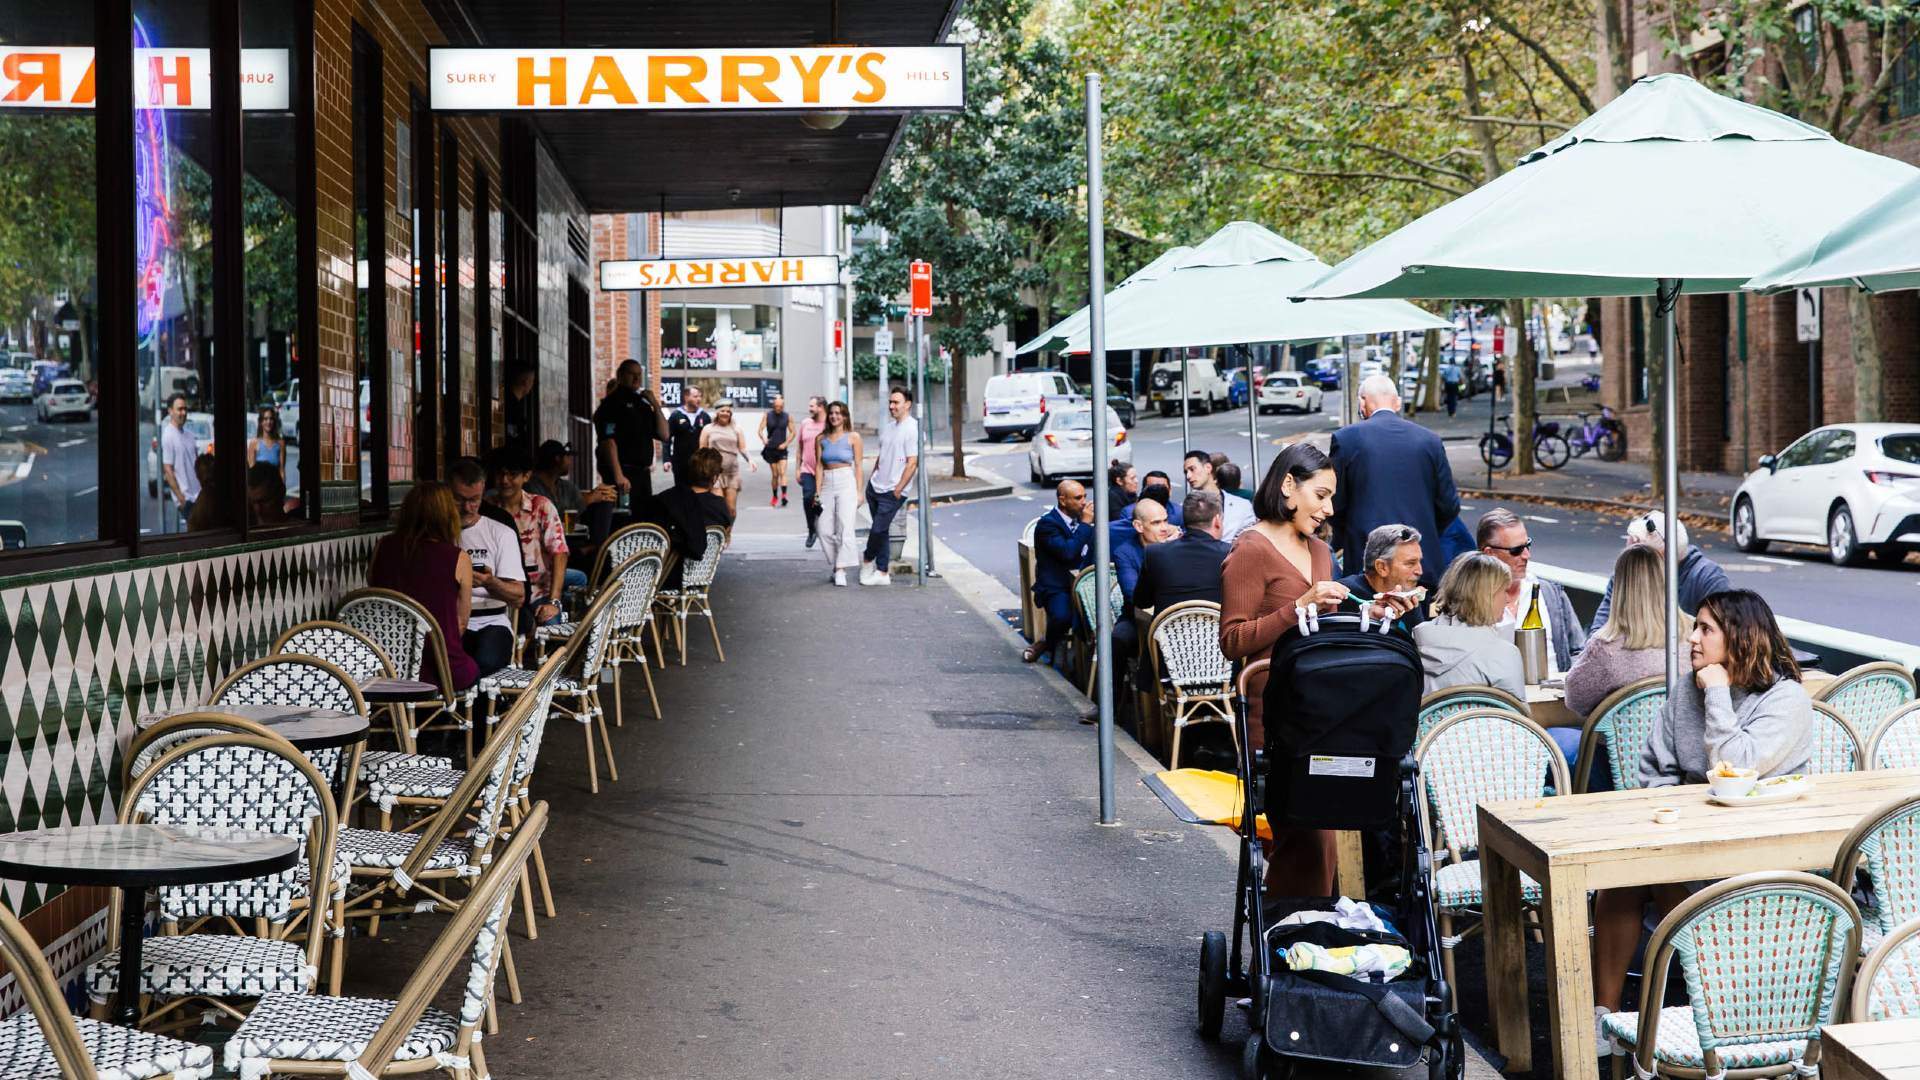 Surry Thrills Is the Two-Week Festival Taking Over Surry Hills' Best Restaurants, Bars, Hotels and Cinemas